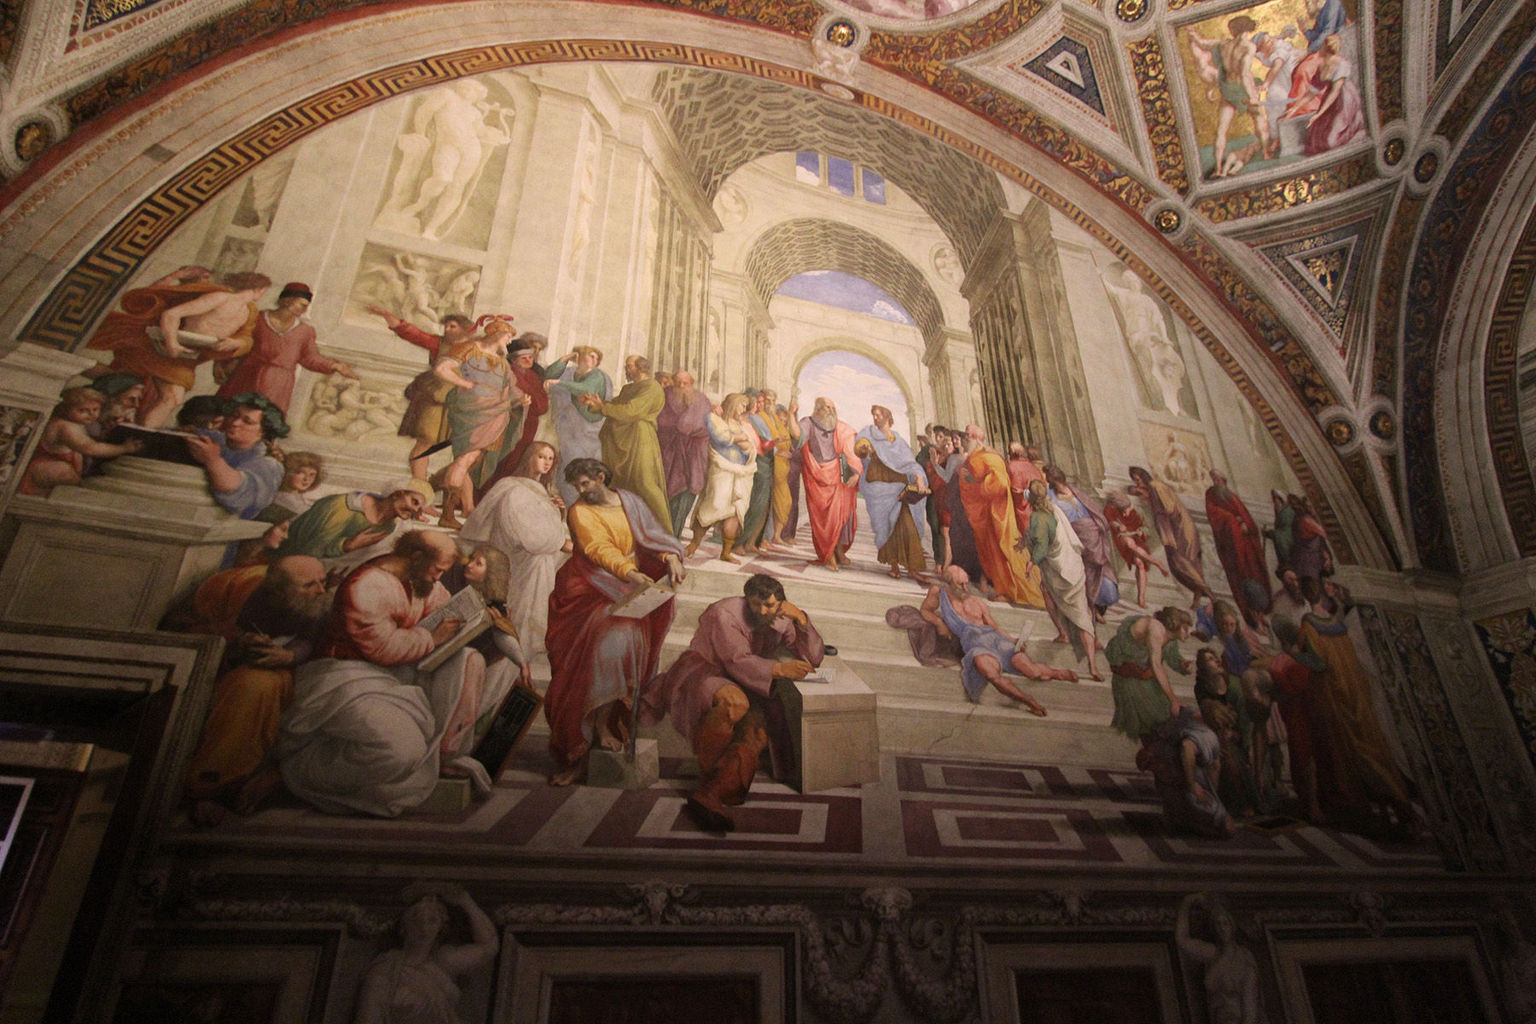 Raphael also left his mark on the Vatican